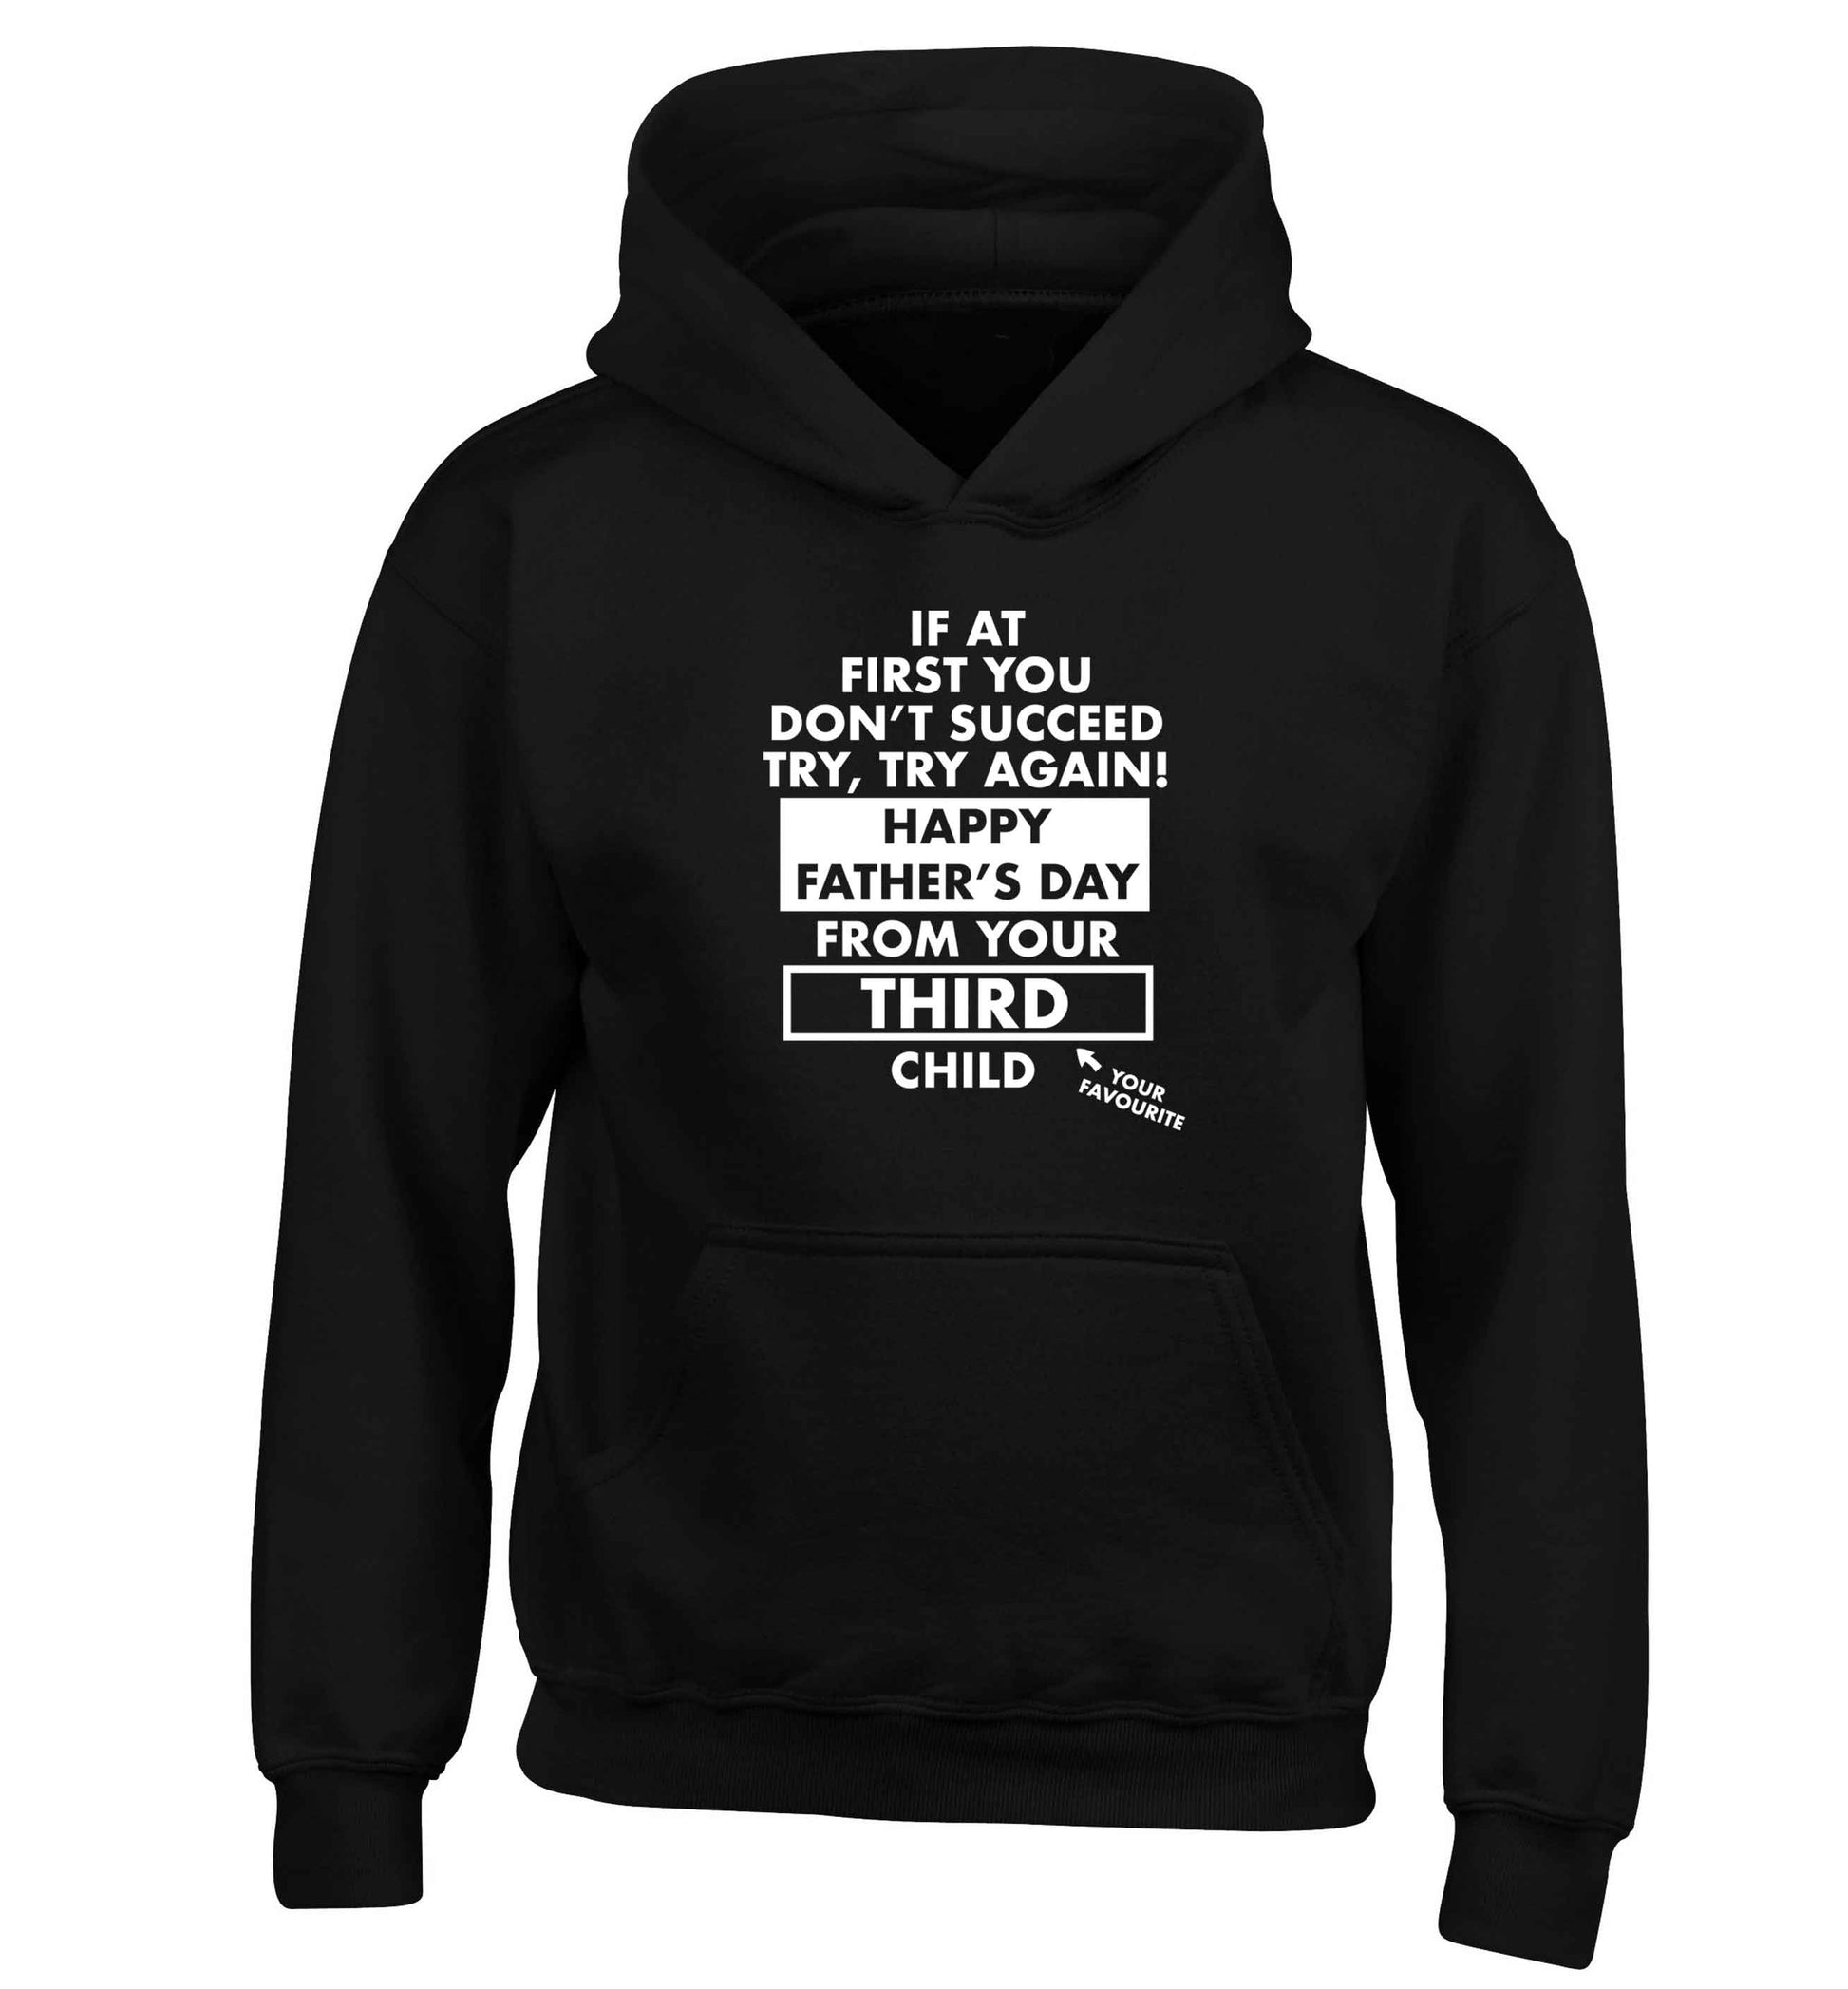 If at first you don't succeed try, try again Happy Father's day from your third child! children's black hoodie 12-13 Years